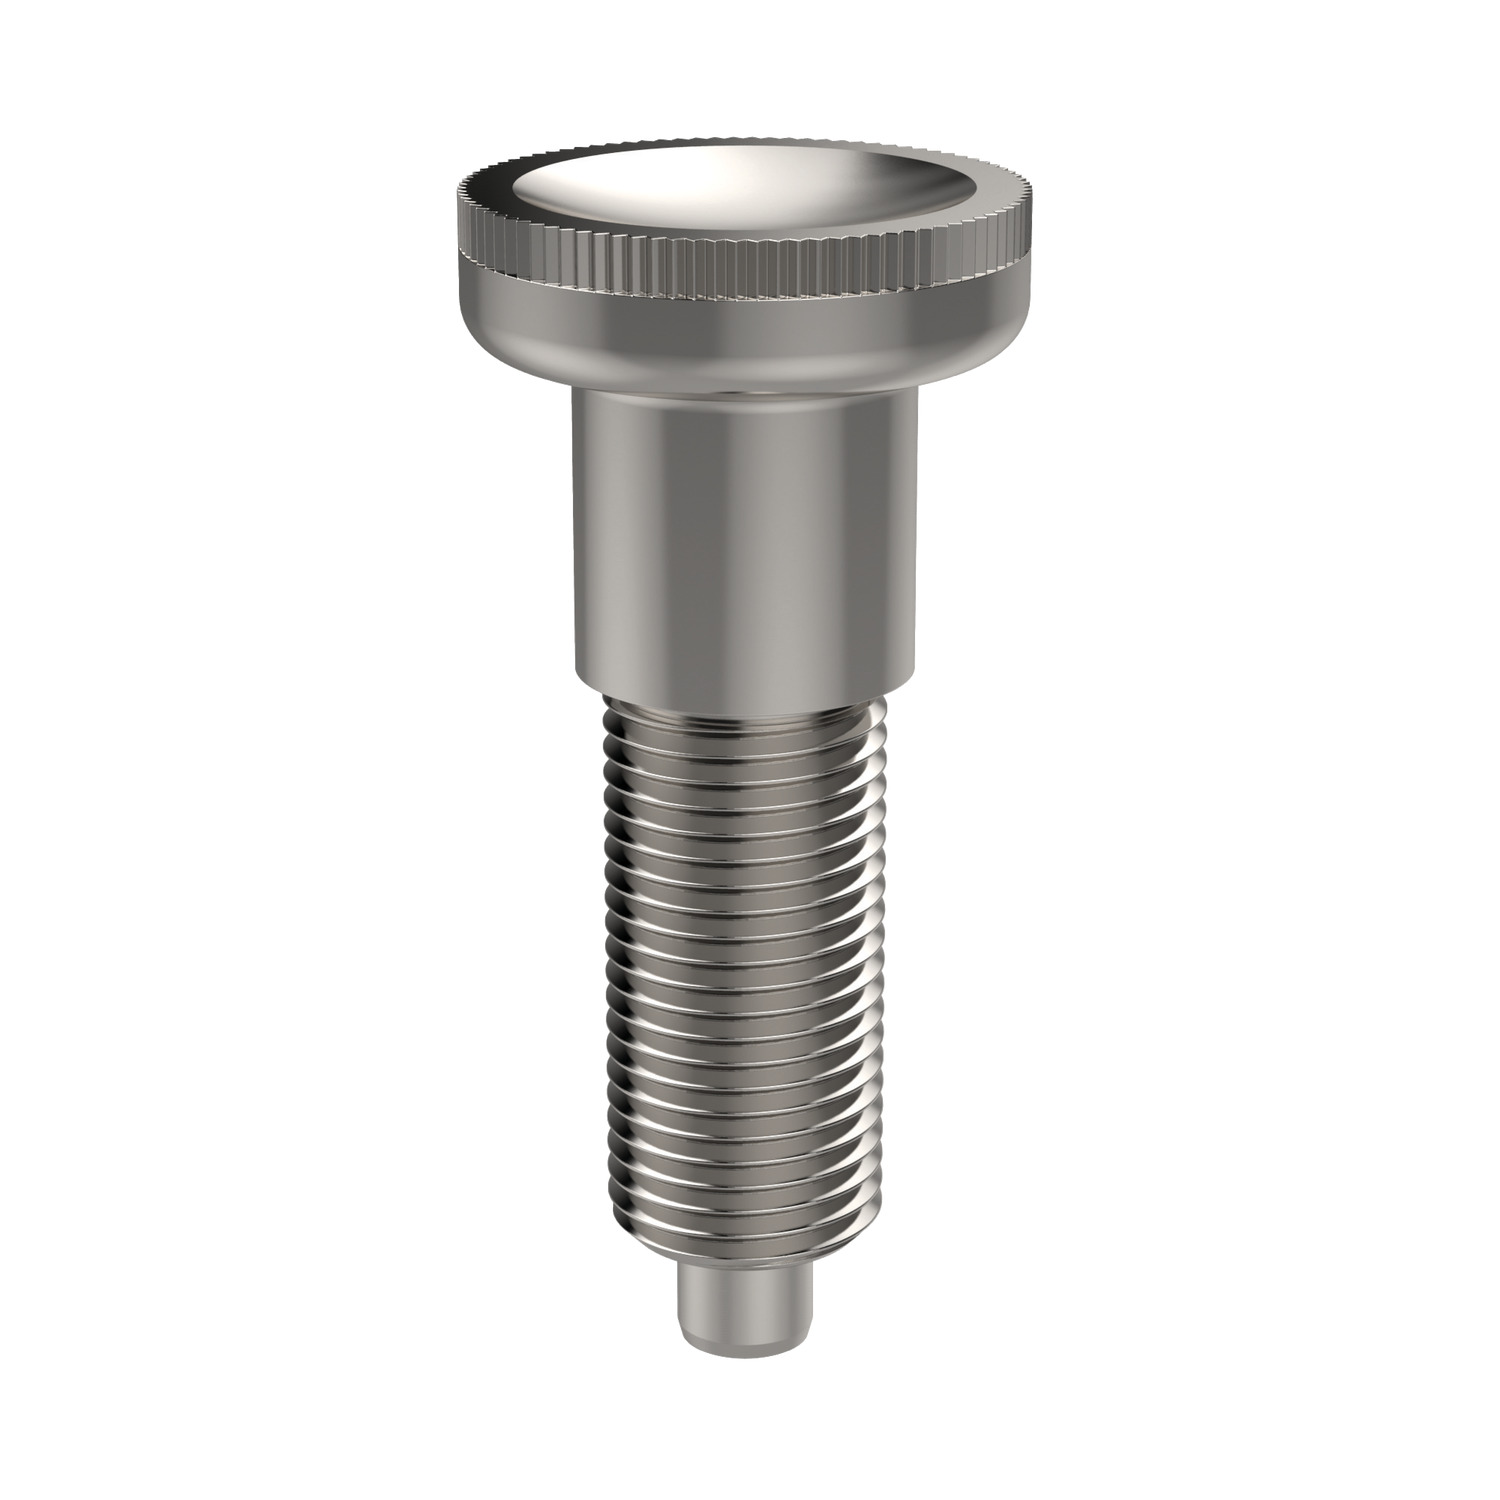 32742.W0705 All Stainless Steel Index Plunger 5 - M10 x 1.0. All Stainless.